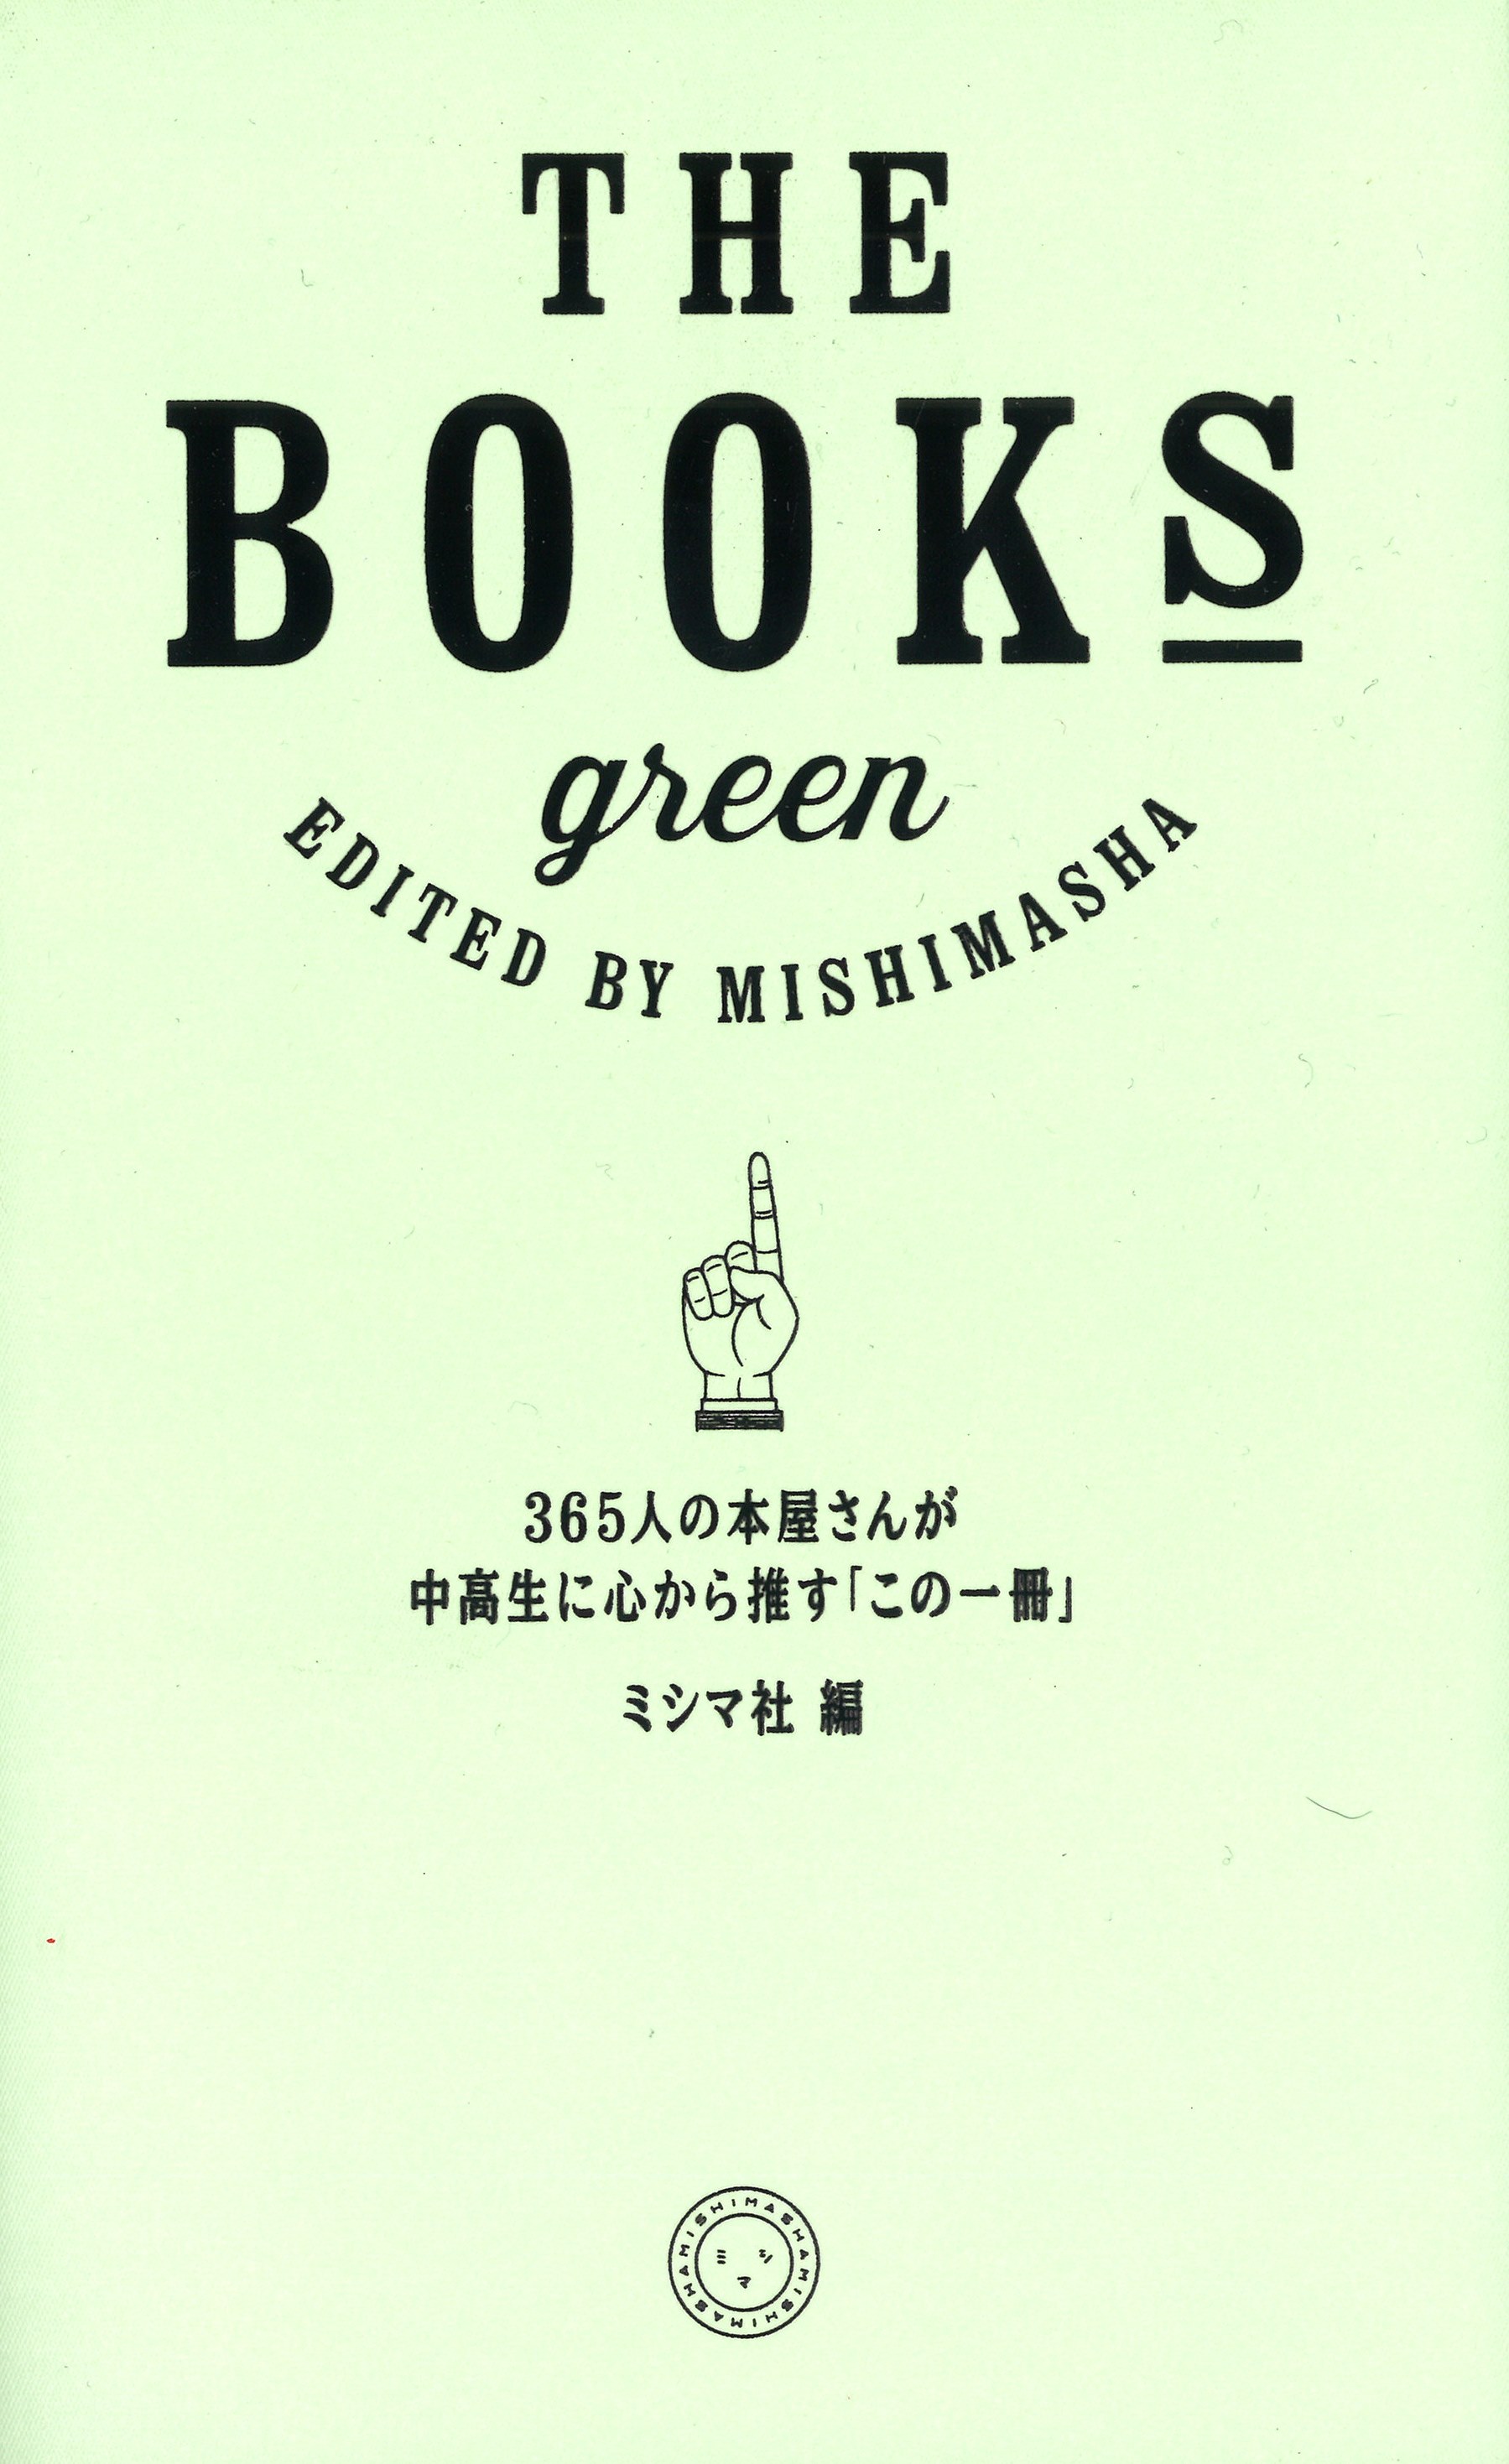 THE BOOKS green